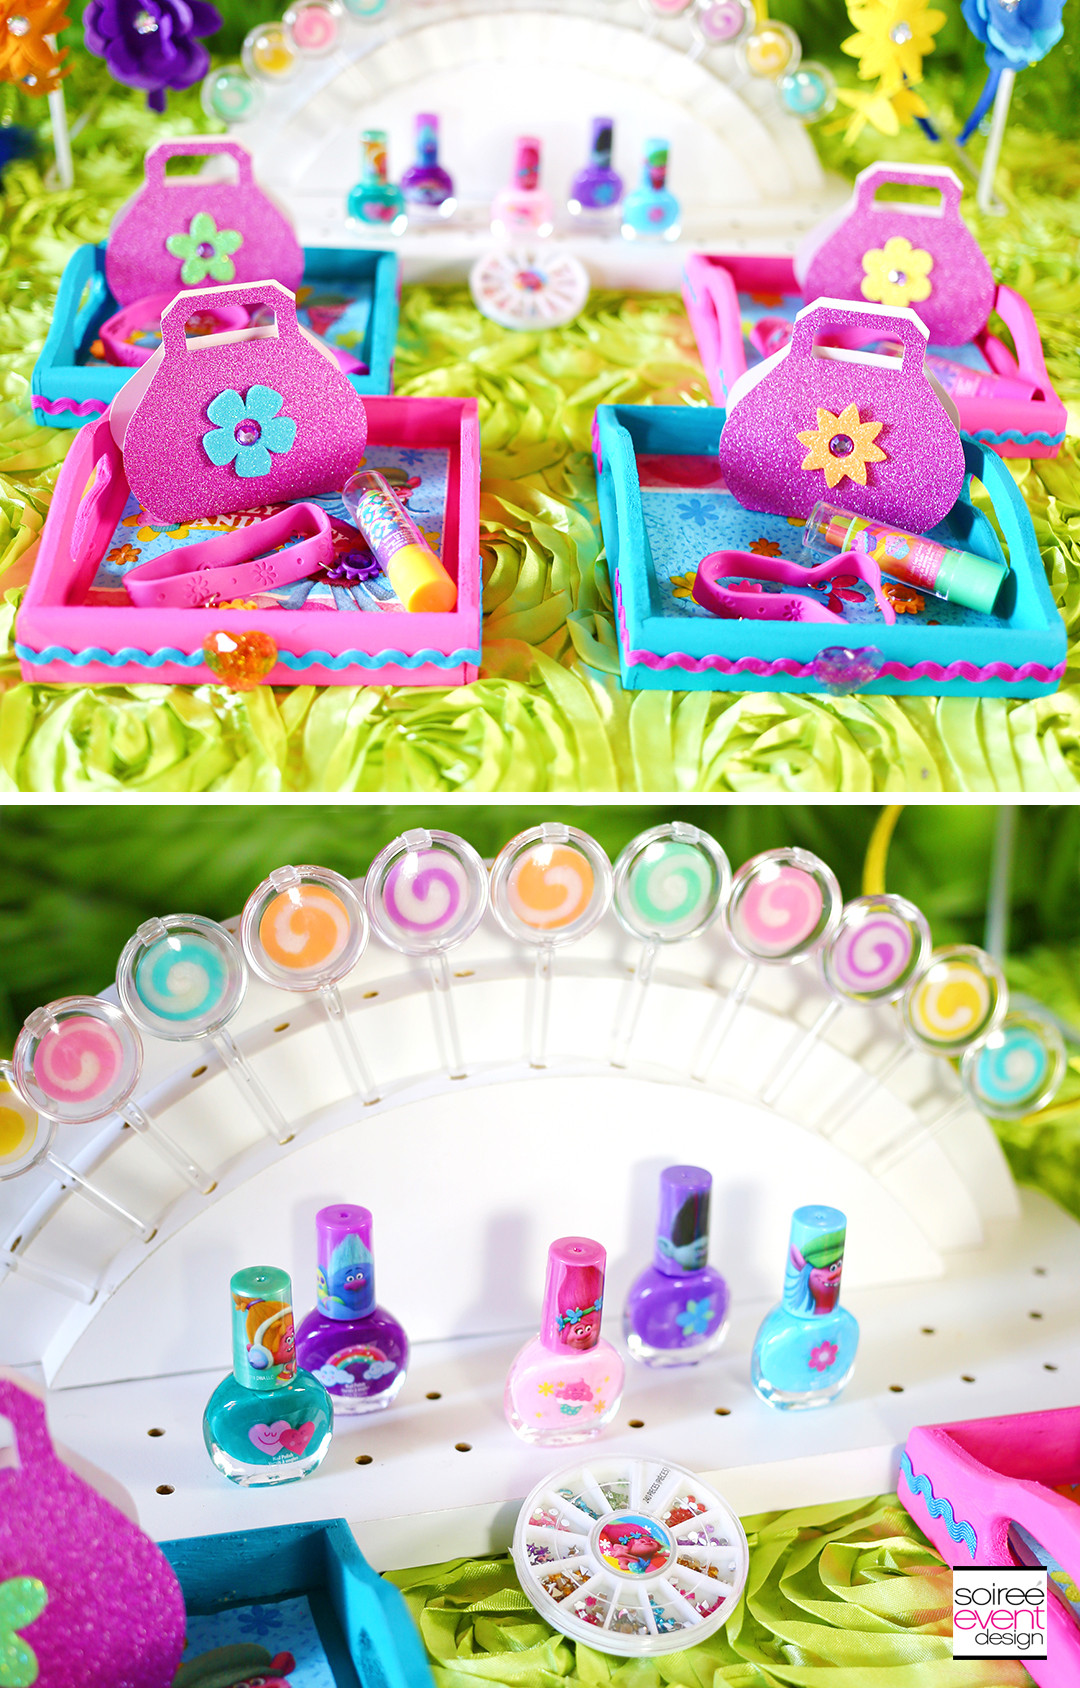 Trolls Bday Party Ideas
 TREND ALERT Host a Trolls Party with these Trolls Party